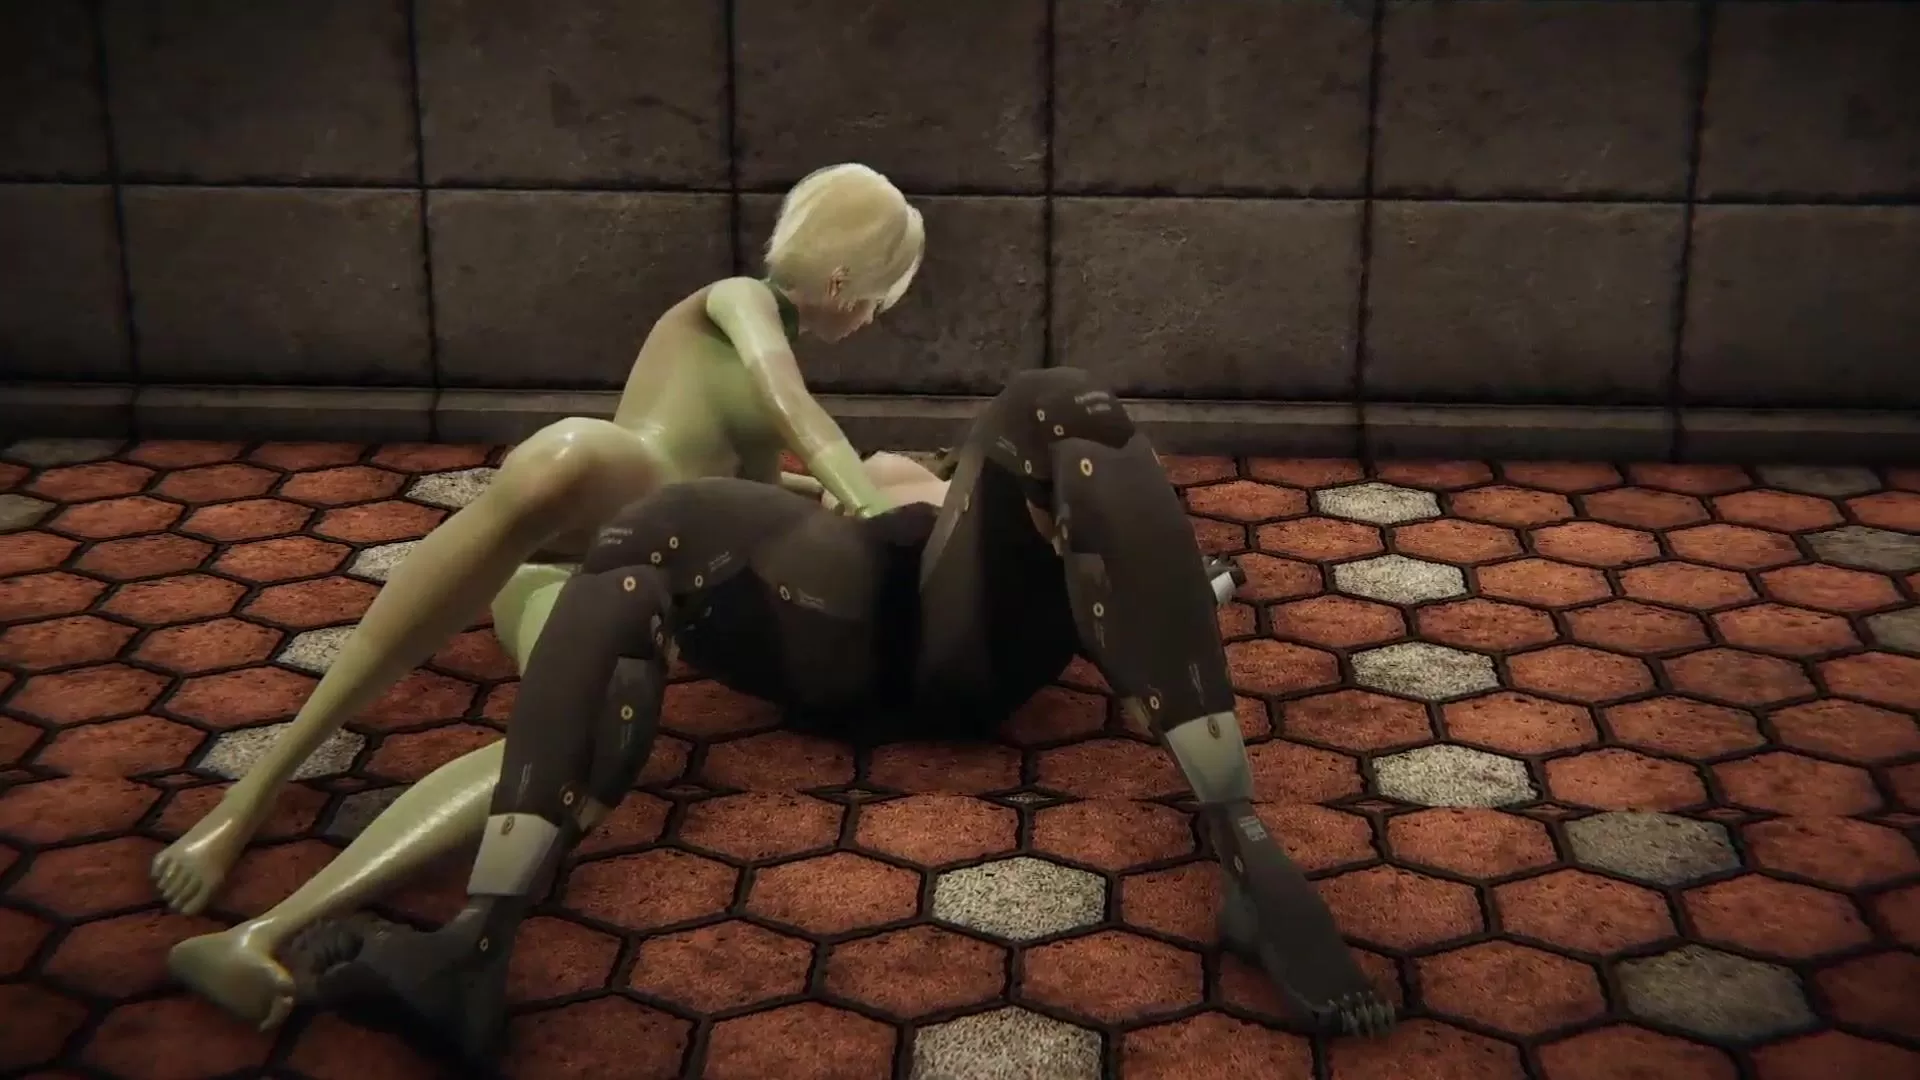 Metal Gear Solid 4 Porn - MGS4 Laughing Octopus caress soldier girl [Full Video]9m watch online